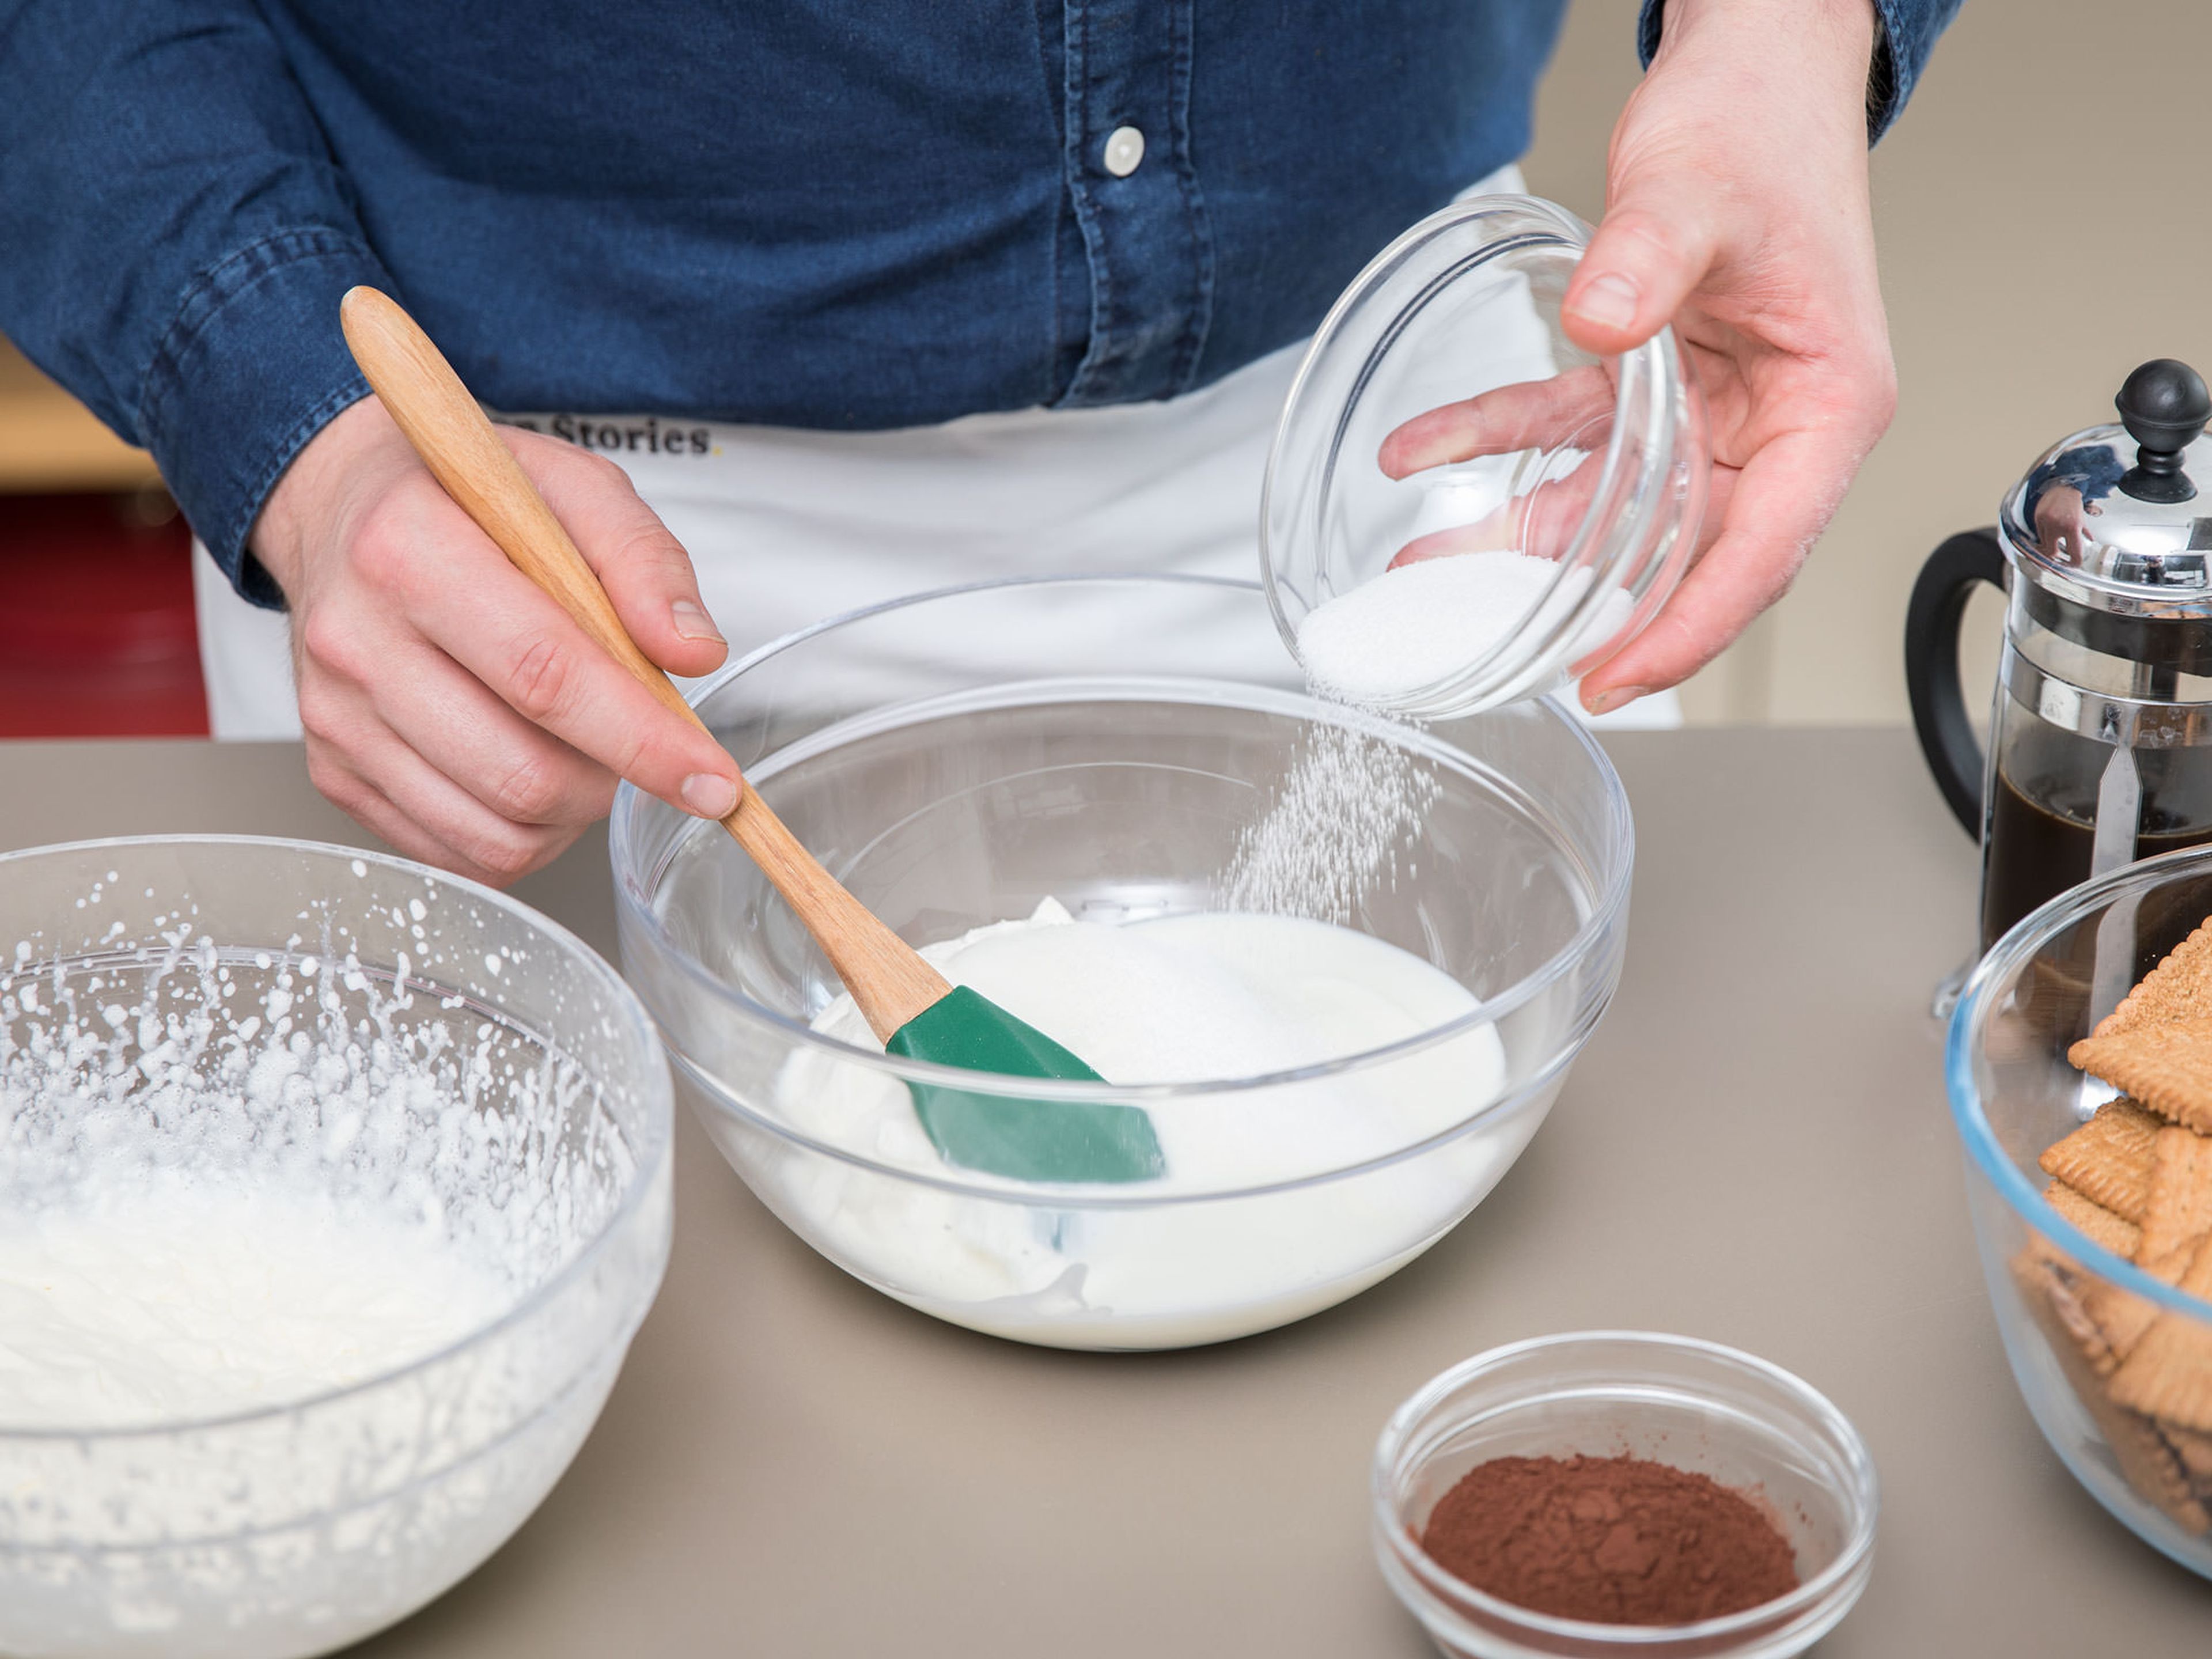 Make a pot of strong coffee and set aside to cool. Whip heavy cream in a bowl until stiff, then chill in the refrigerator. Now beat together the quark, yogurt, sugar, and vanilla sugar until the sugar has dissolved. Taste as you go and adjust sugar volume to preference.